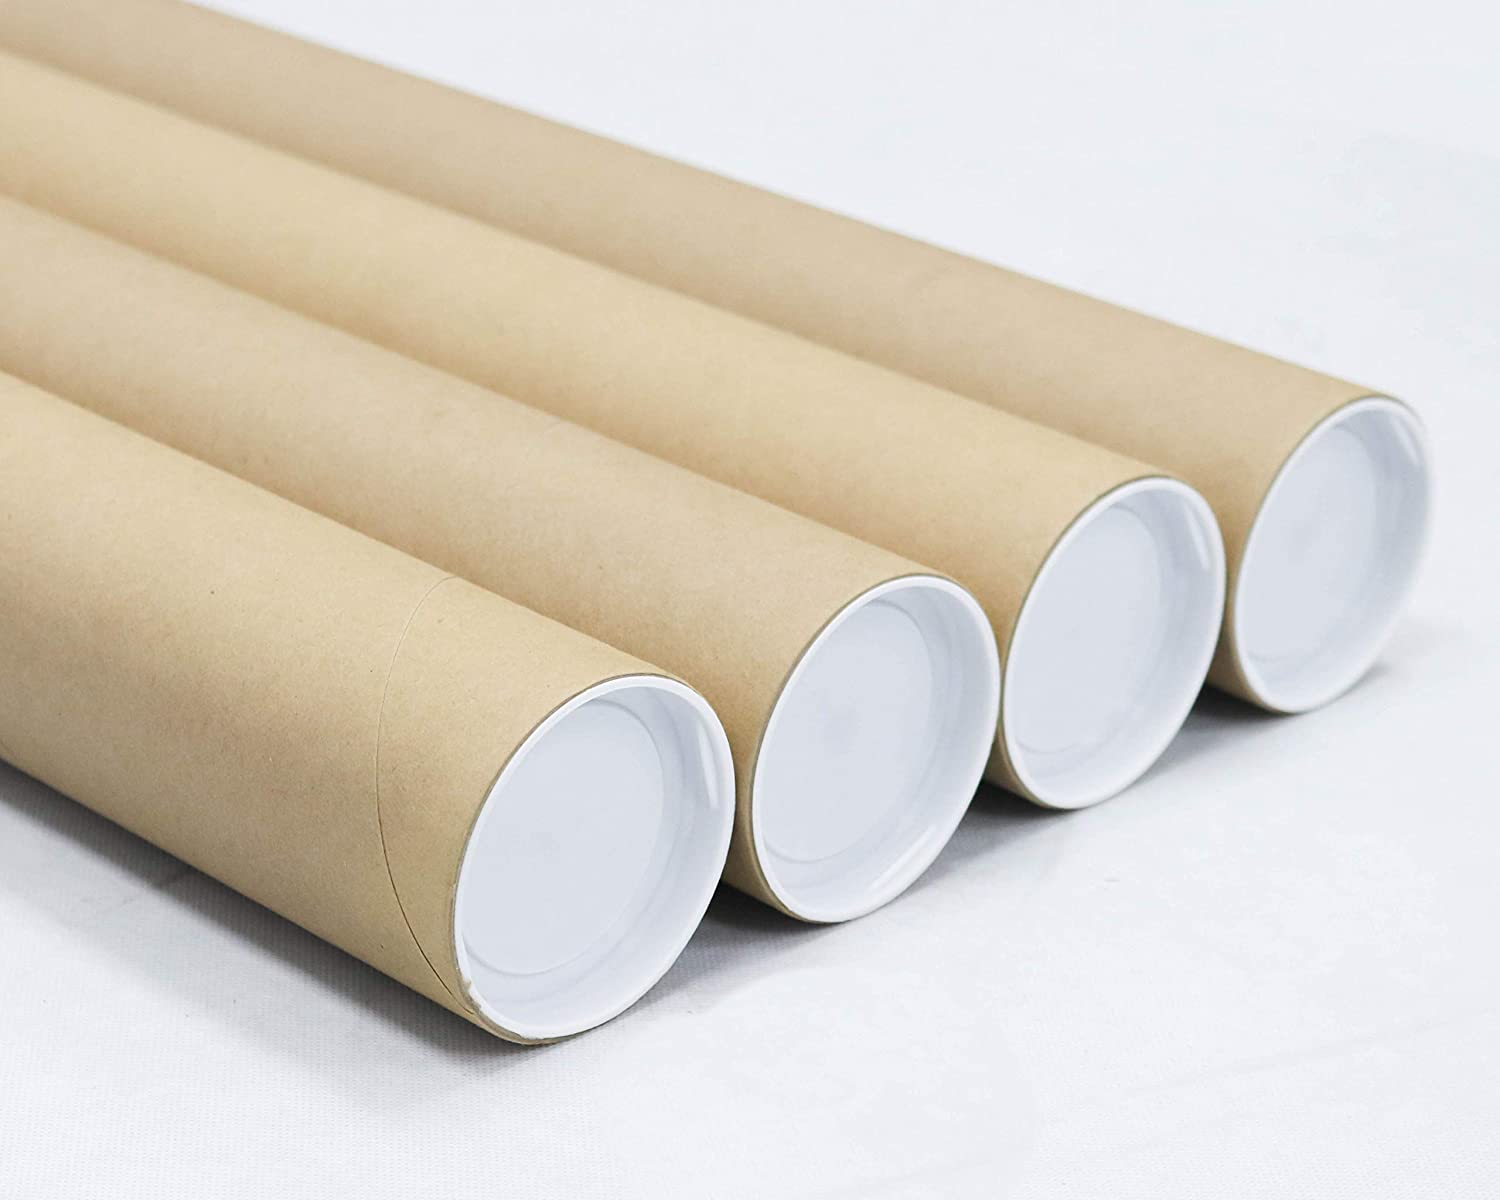 Tubeequeen Kraft Mailing Tubes with End Caps - Art Shipping Tubes 1.5-inch  D x 24-inch L, 4 Pack